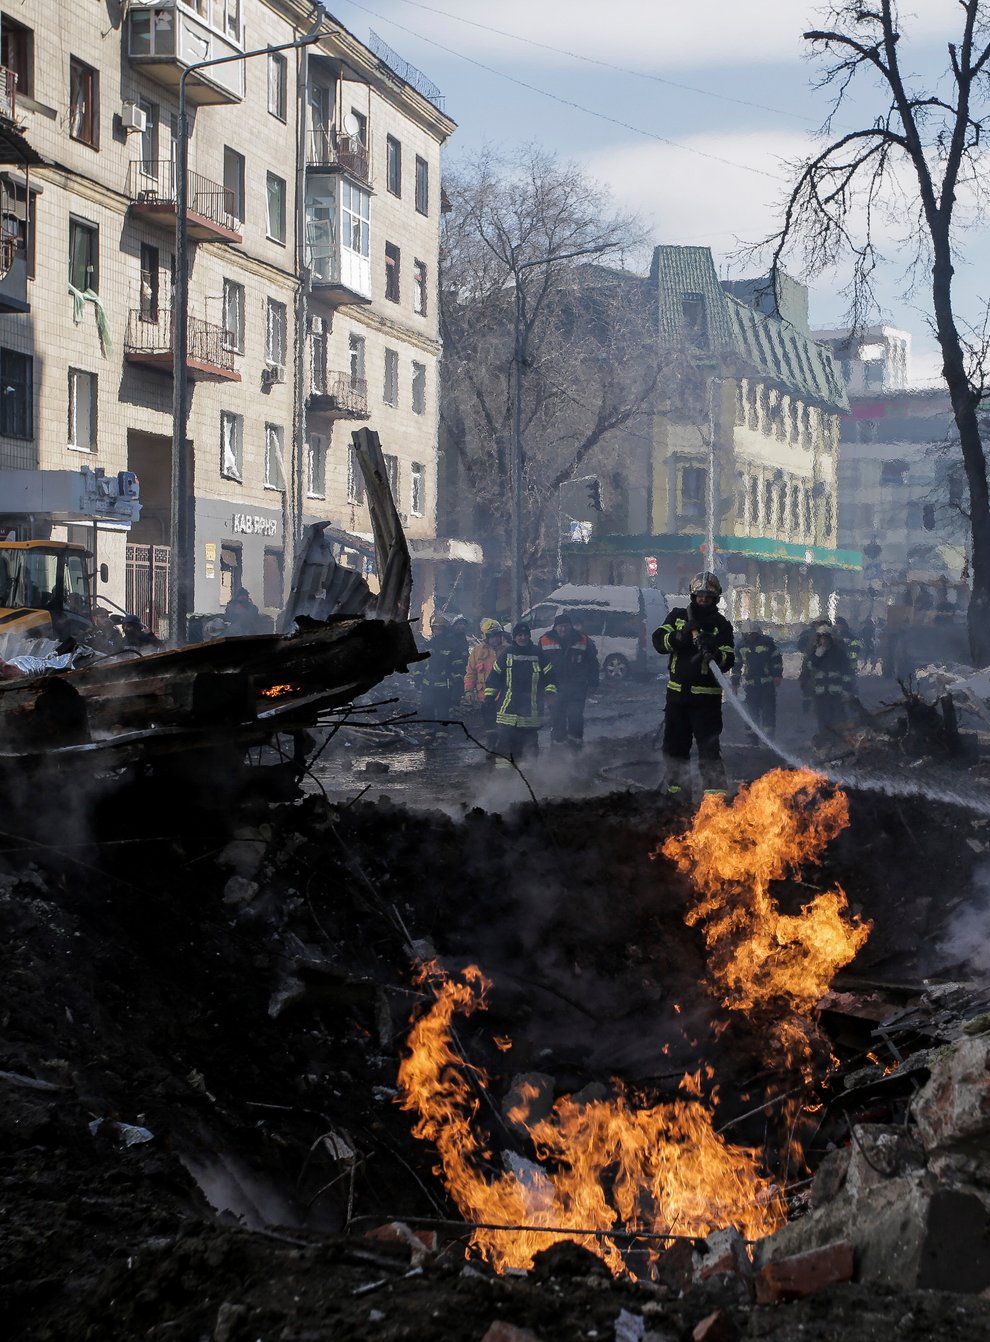 Firefighters extinguish flames outside an apartment house after a Russian rocket attack in Kharkiv (Pavel Dorogoy/AP)